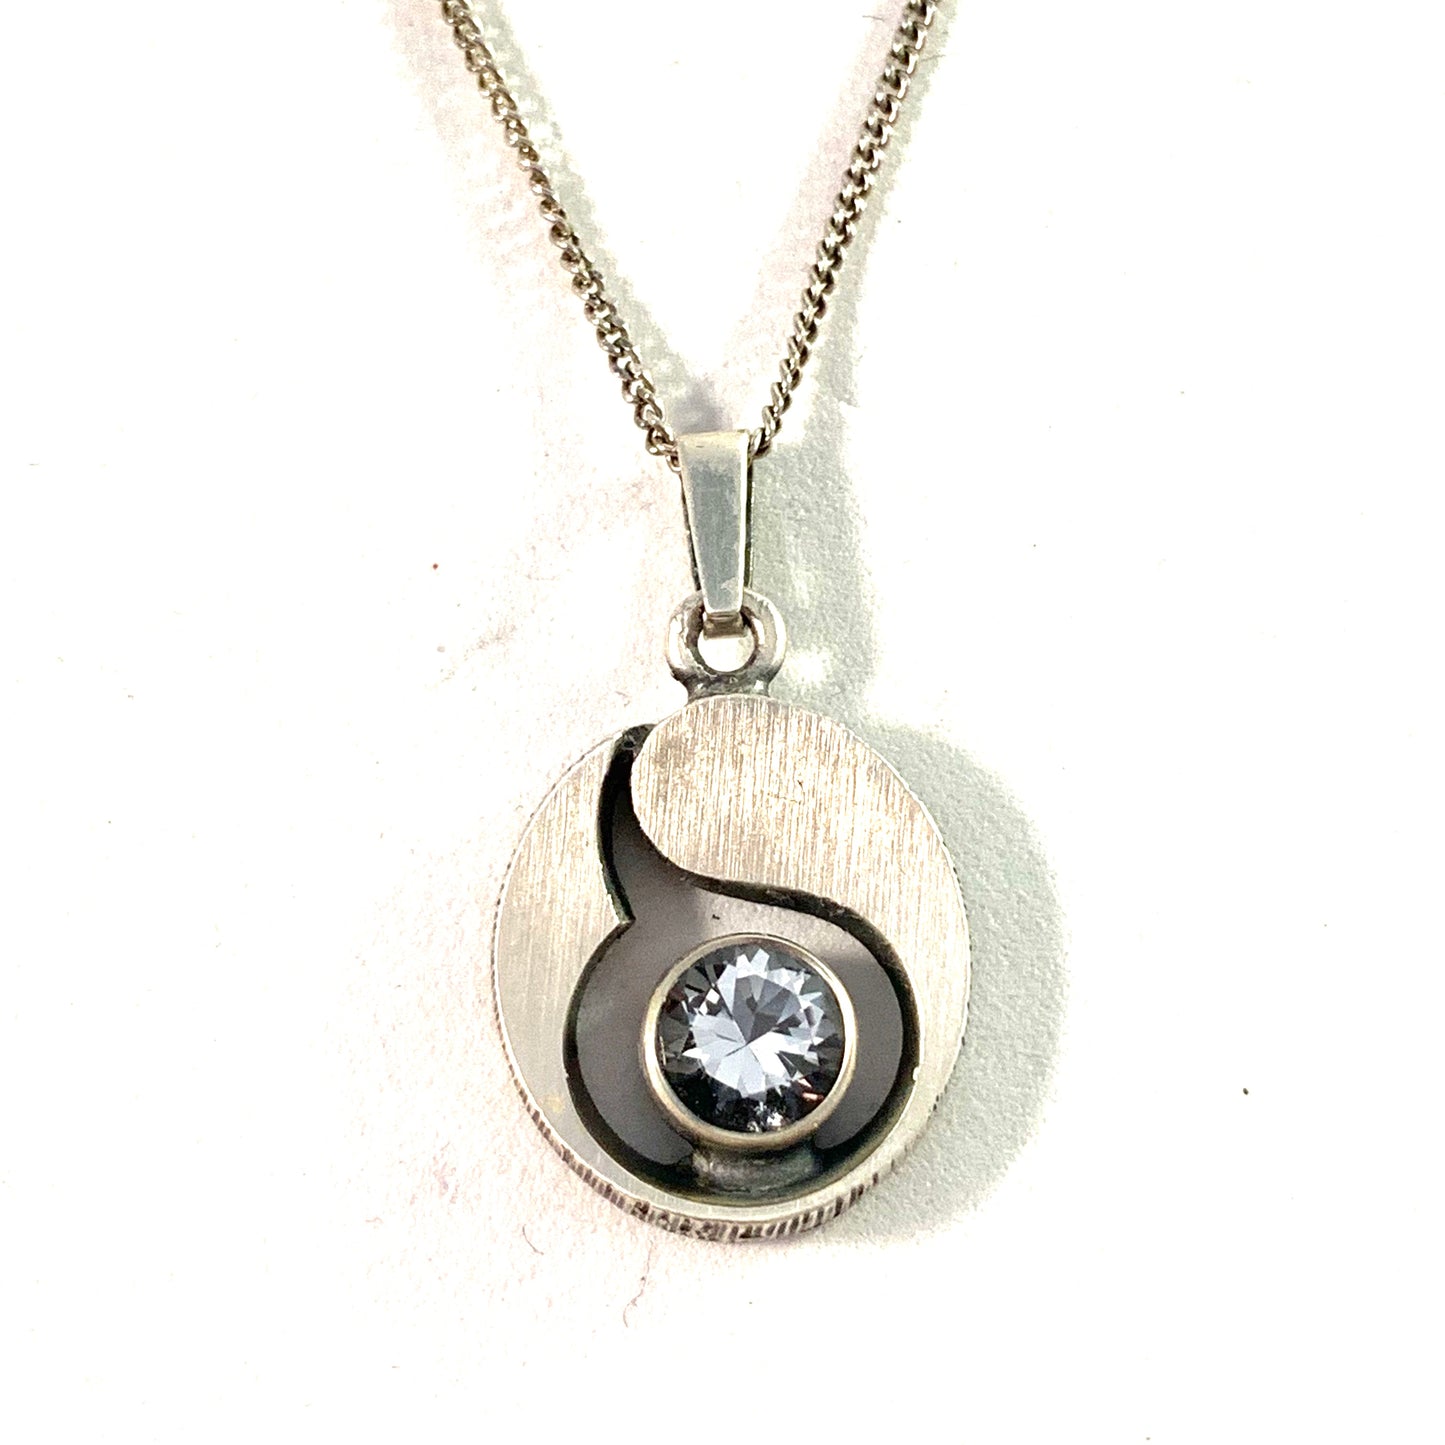 Karl Laine for Finnfeelings, Finland Vintage Solid Silver Rock Crystal Pendant Necklace. Boxed.